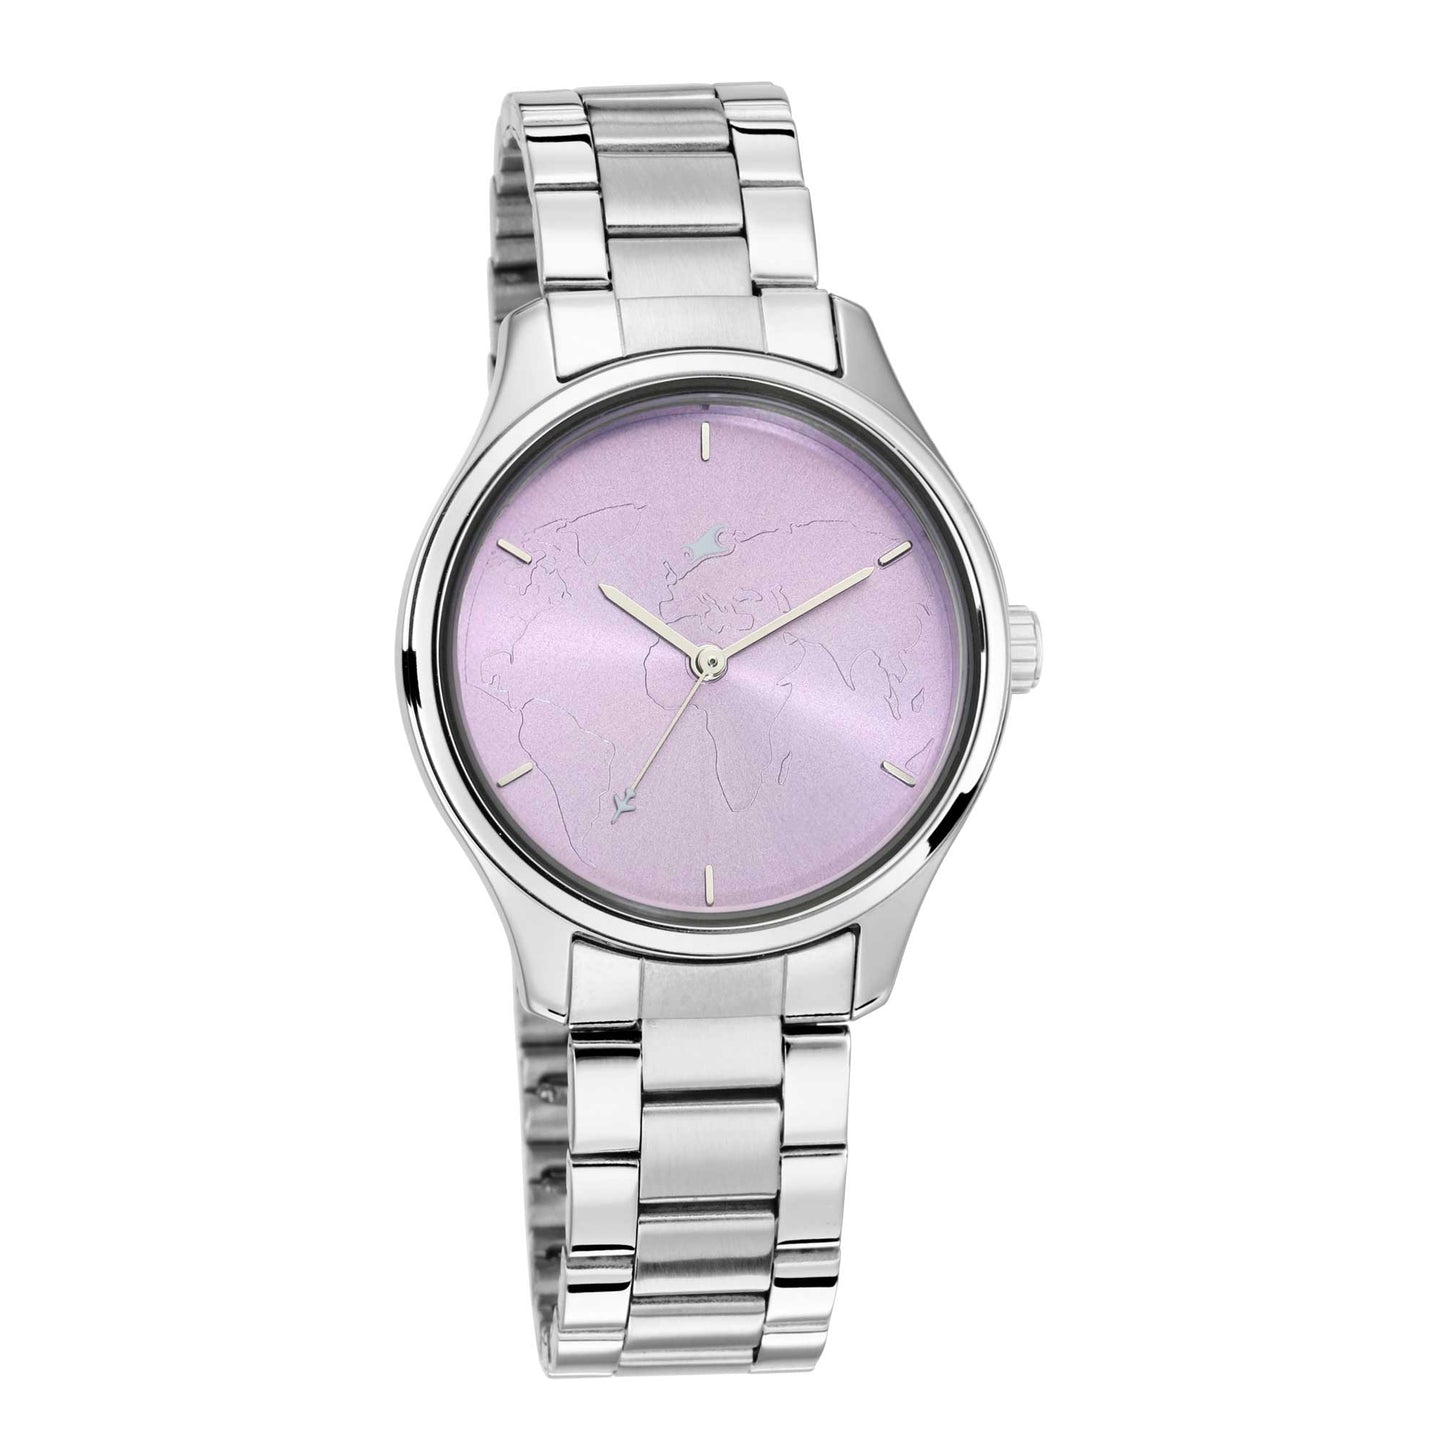 Fastrack Tripster Quartz Analog Purple Dial Stainless Steel Strap Watch for Girls